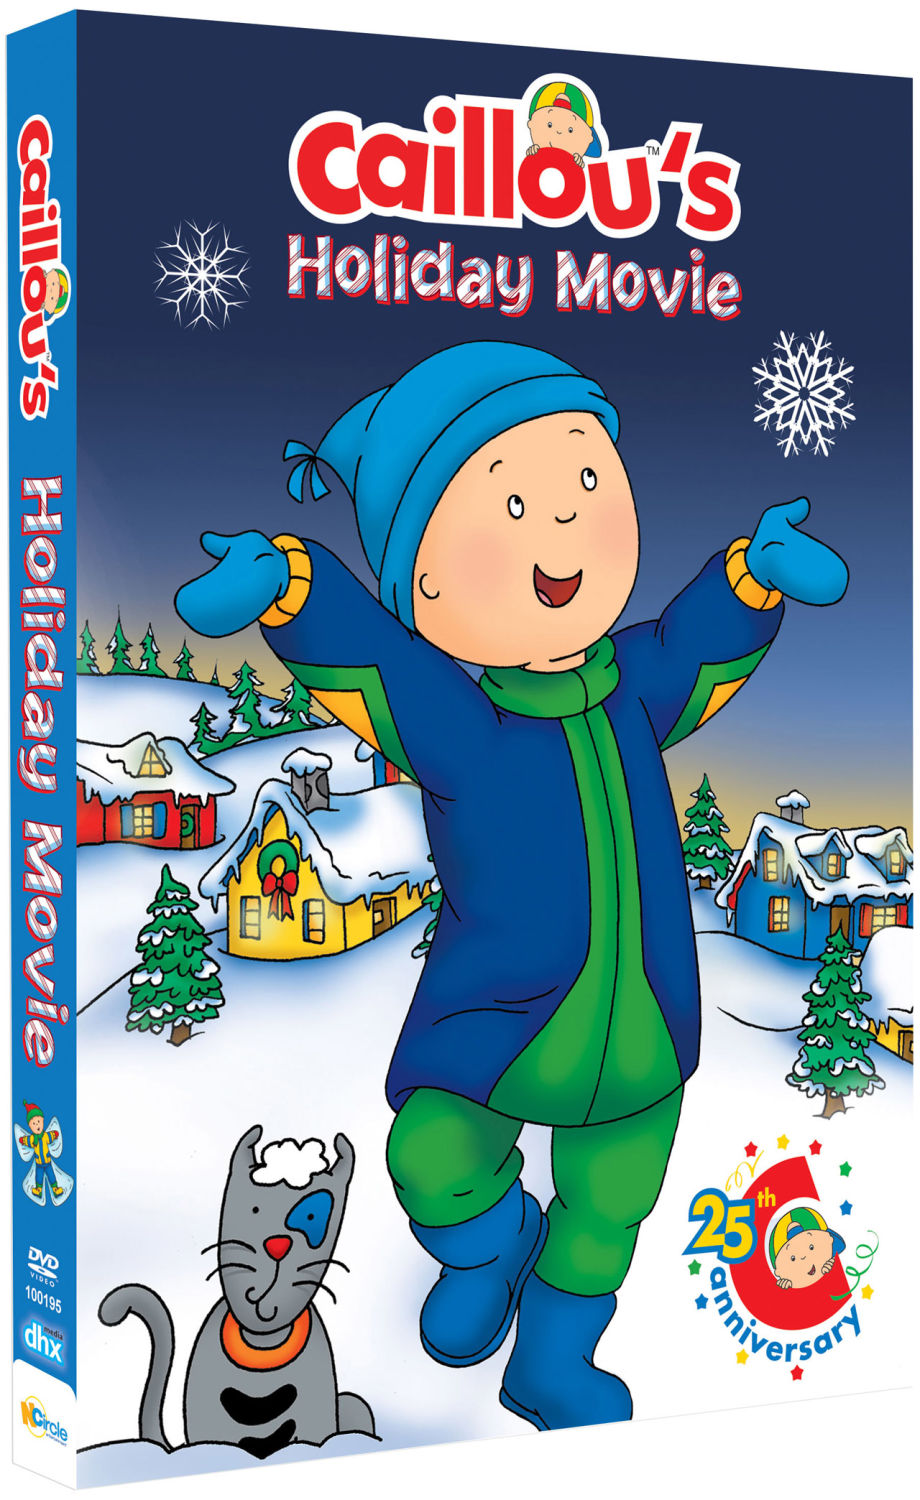 Spread Christmas Cheer with Caillou's Holiday Movie - The Toy Insider